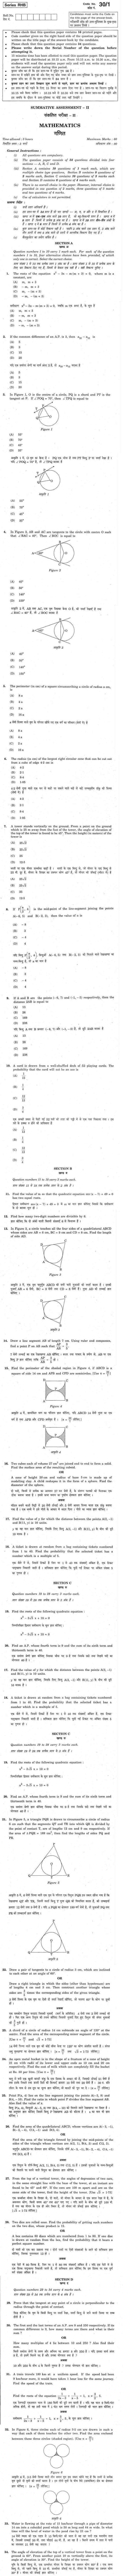 CBSE Class X Previous Year Question Papers 2011 Mathematics